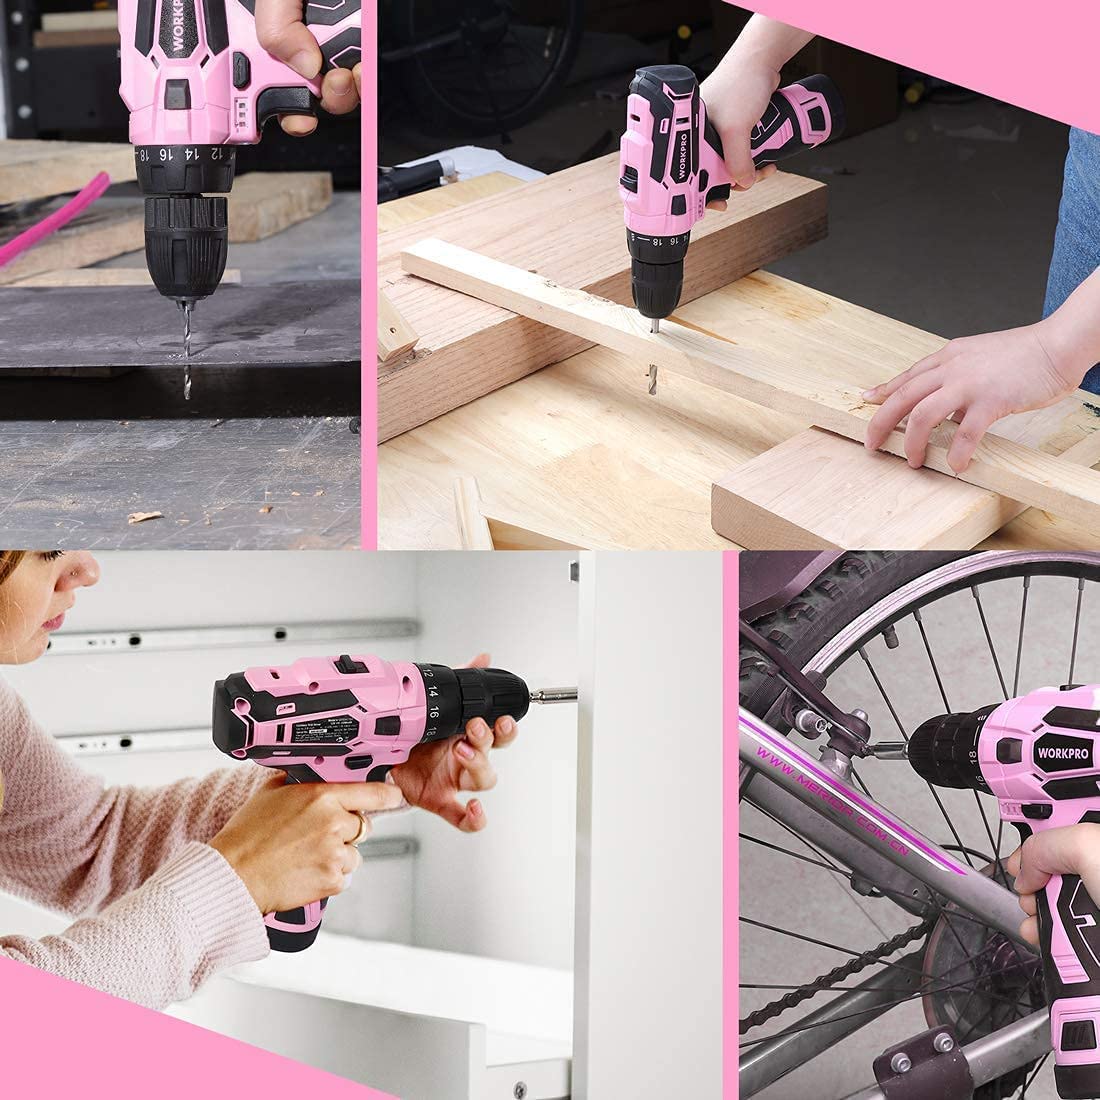 WORKPRO Pink Cordless Drill Driver Set, 12V Electric Screwdriver Driver Tool Kit, 3/8" Keyless Chuck, Charger and Storage Bag Included - Pink Ribbon